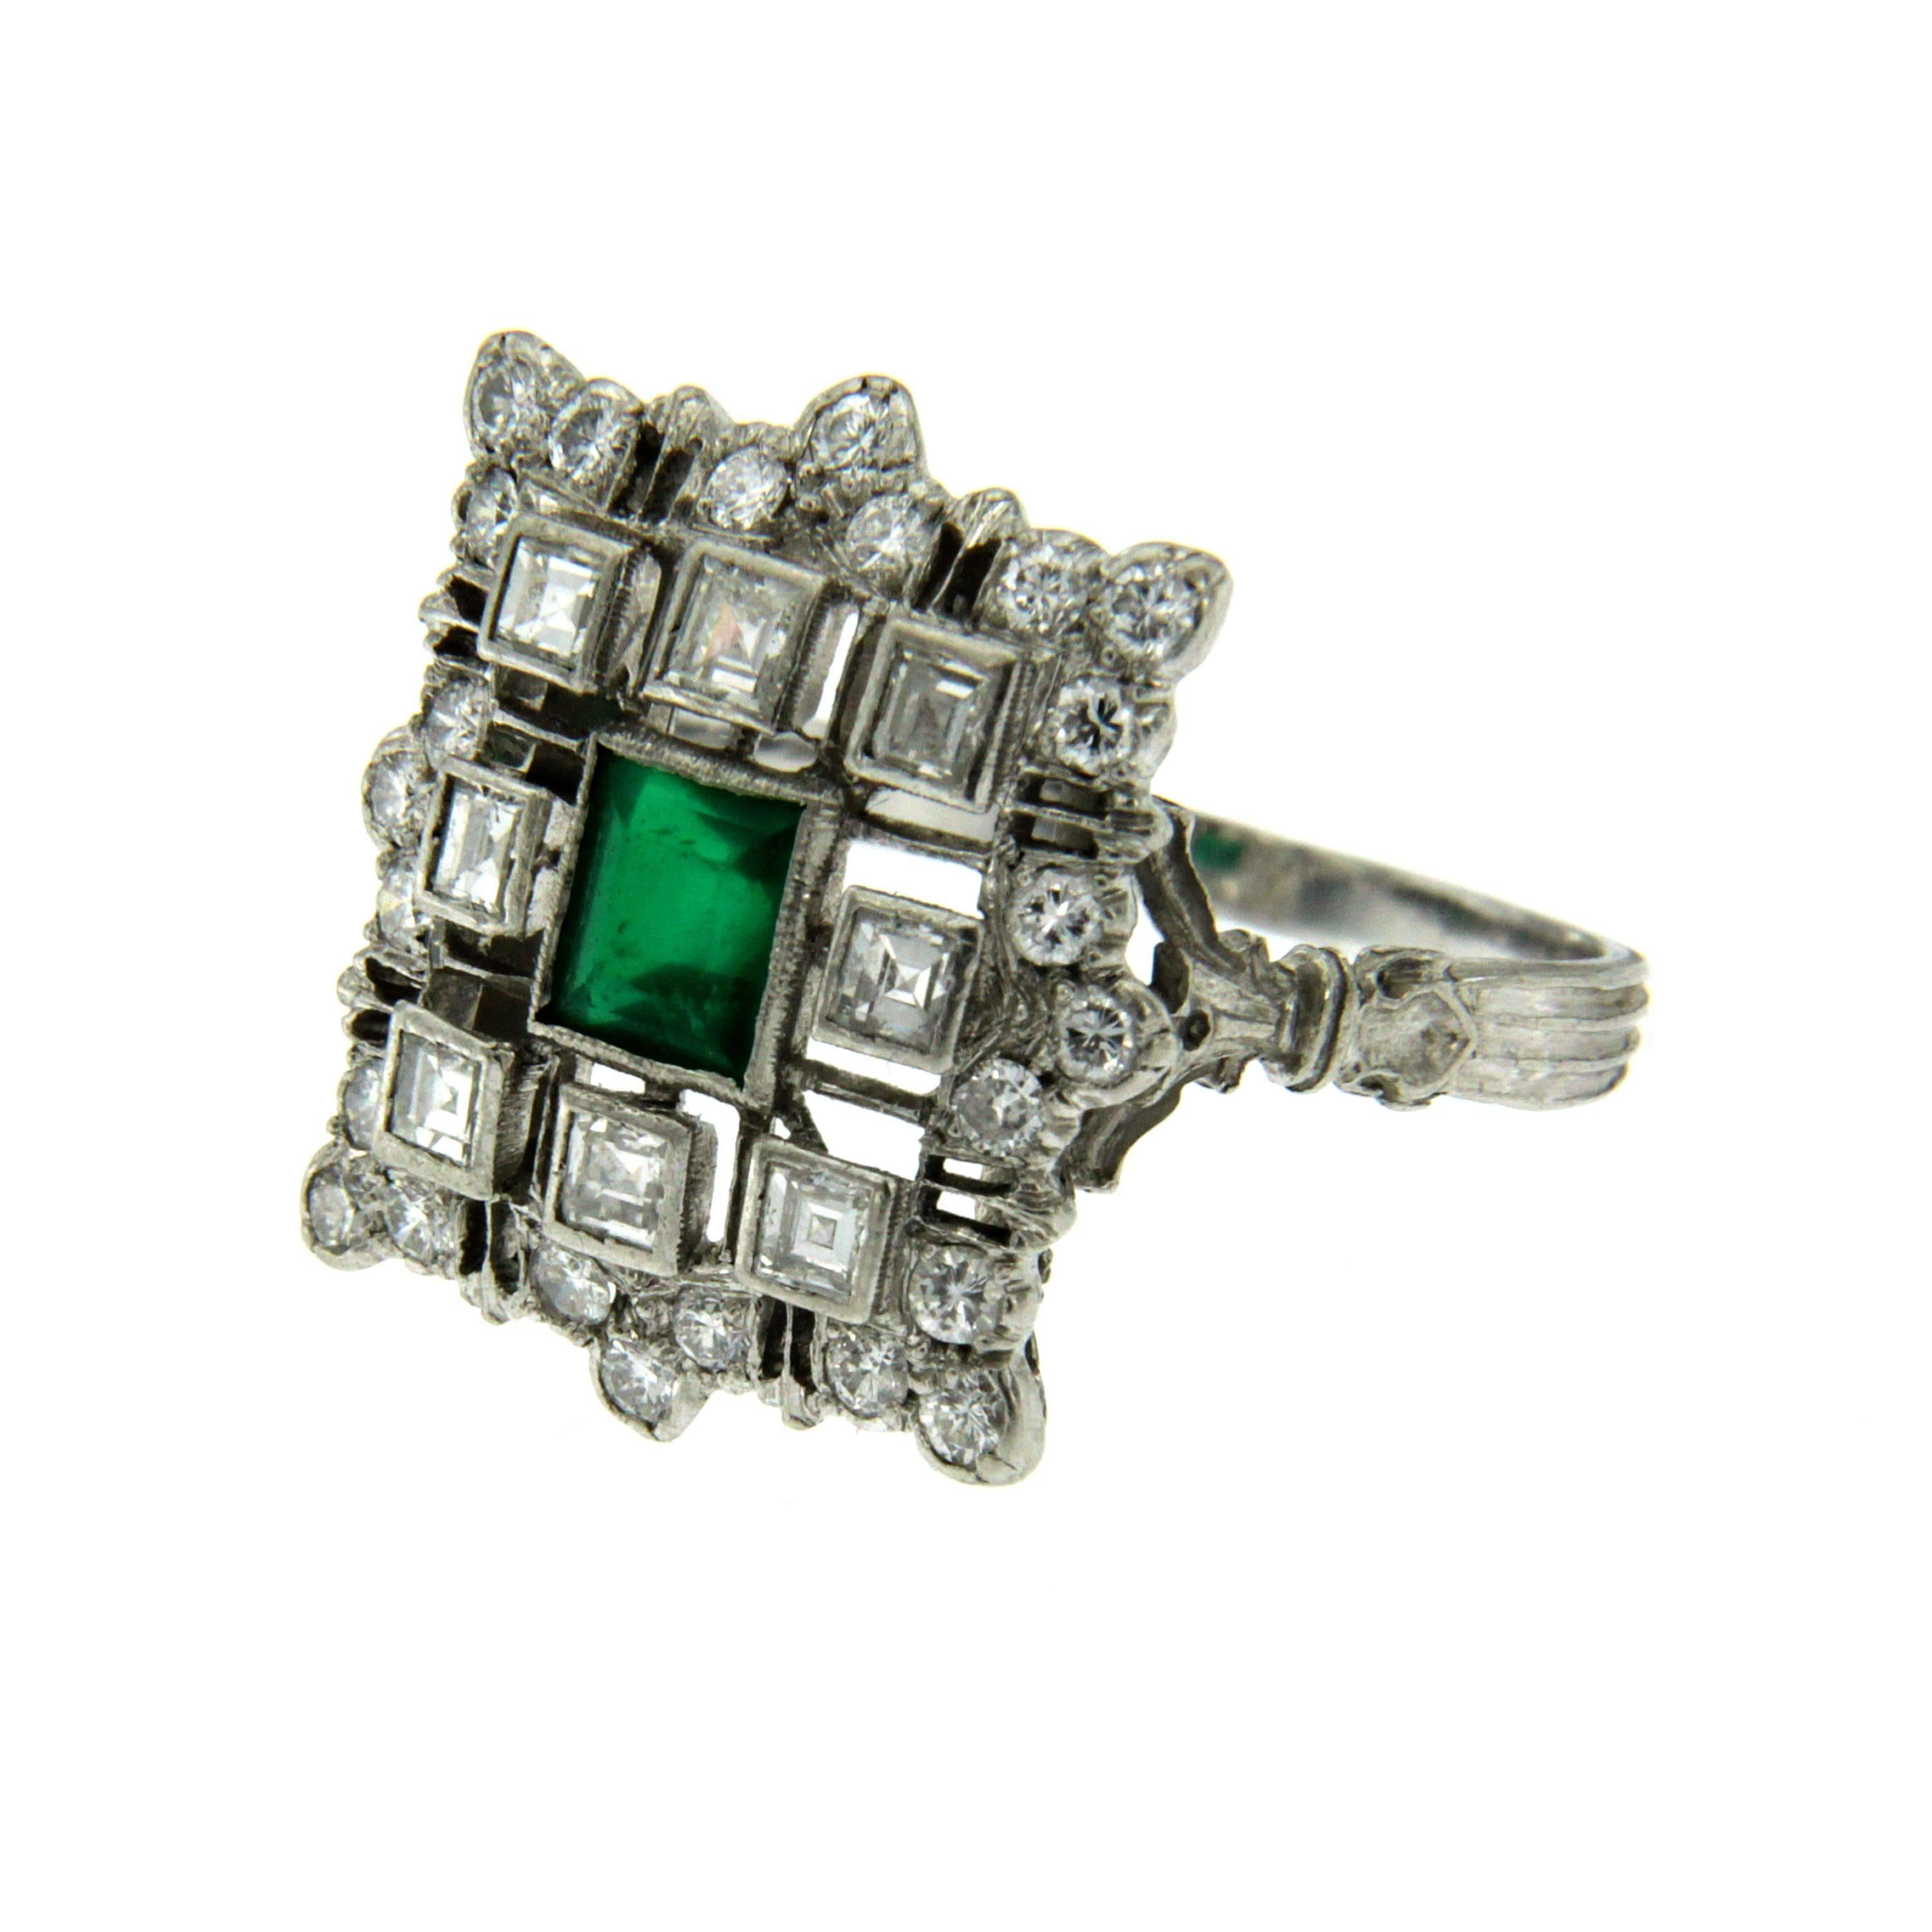 Beautiful ring from 1950, set around with 0.80 carat of round cut and square cut diamonds, graded G color Vs and in the center one emerald cut Emerald weighing approx. 0.50 carats.
This ring is designed and crafted entirely by hand in the